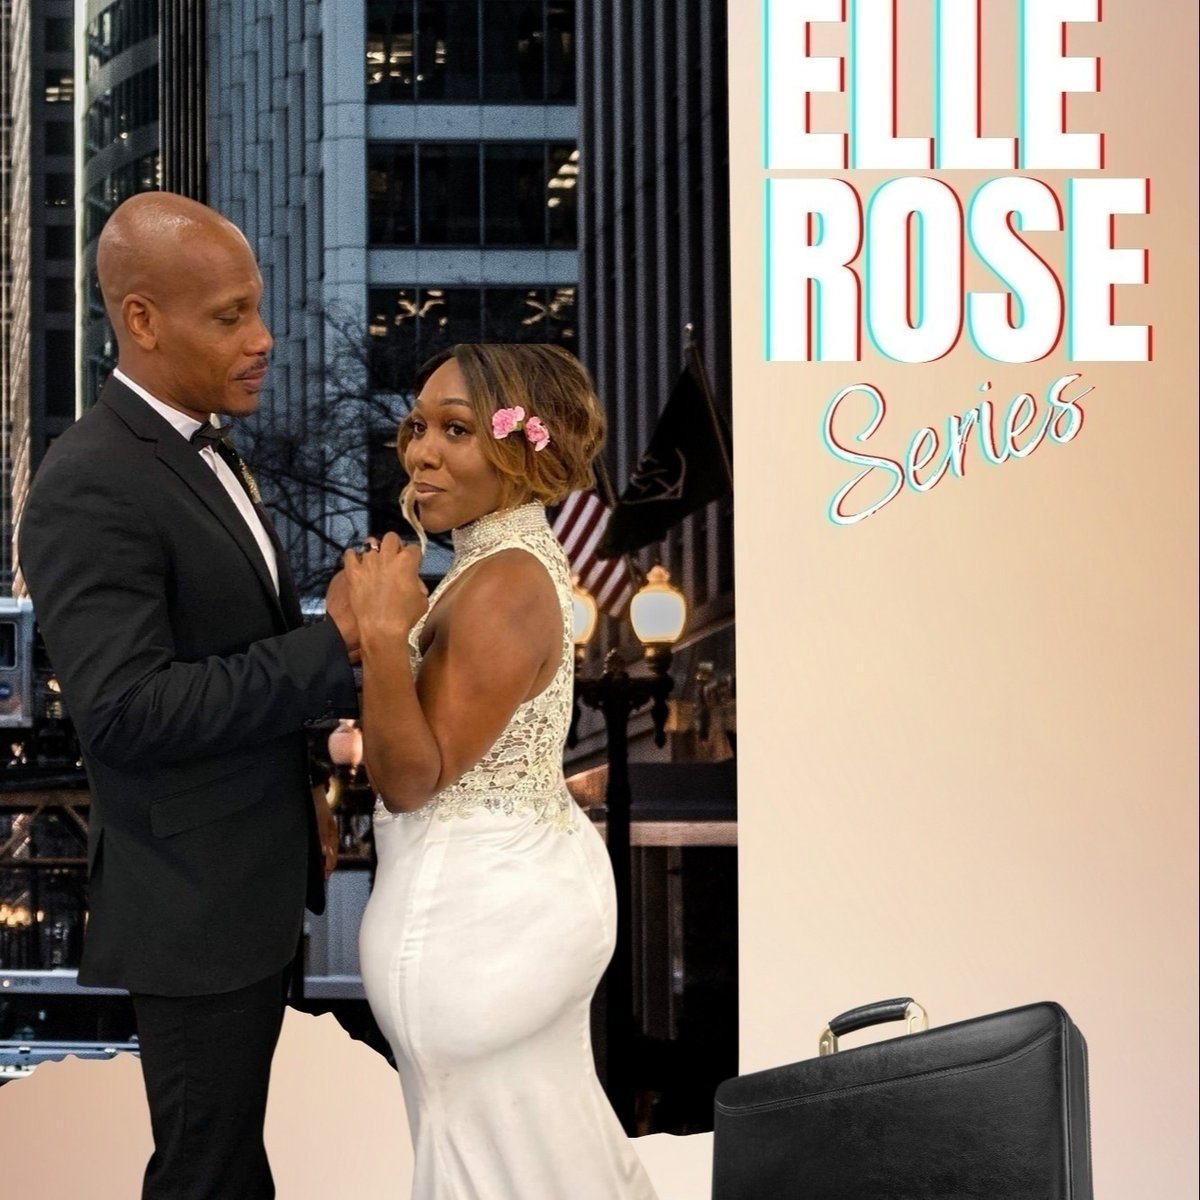 Catch Elle Rose Before it disappears Jan 31st
 #familydrama
#dramaseries #allblackcast #women #BIPOC #LGBTQAI+ #disabilityinclusion #diversityinfilm #inclusion #heartbeatofindiecontent #streamingnow